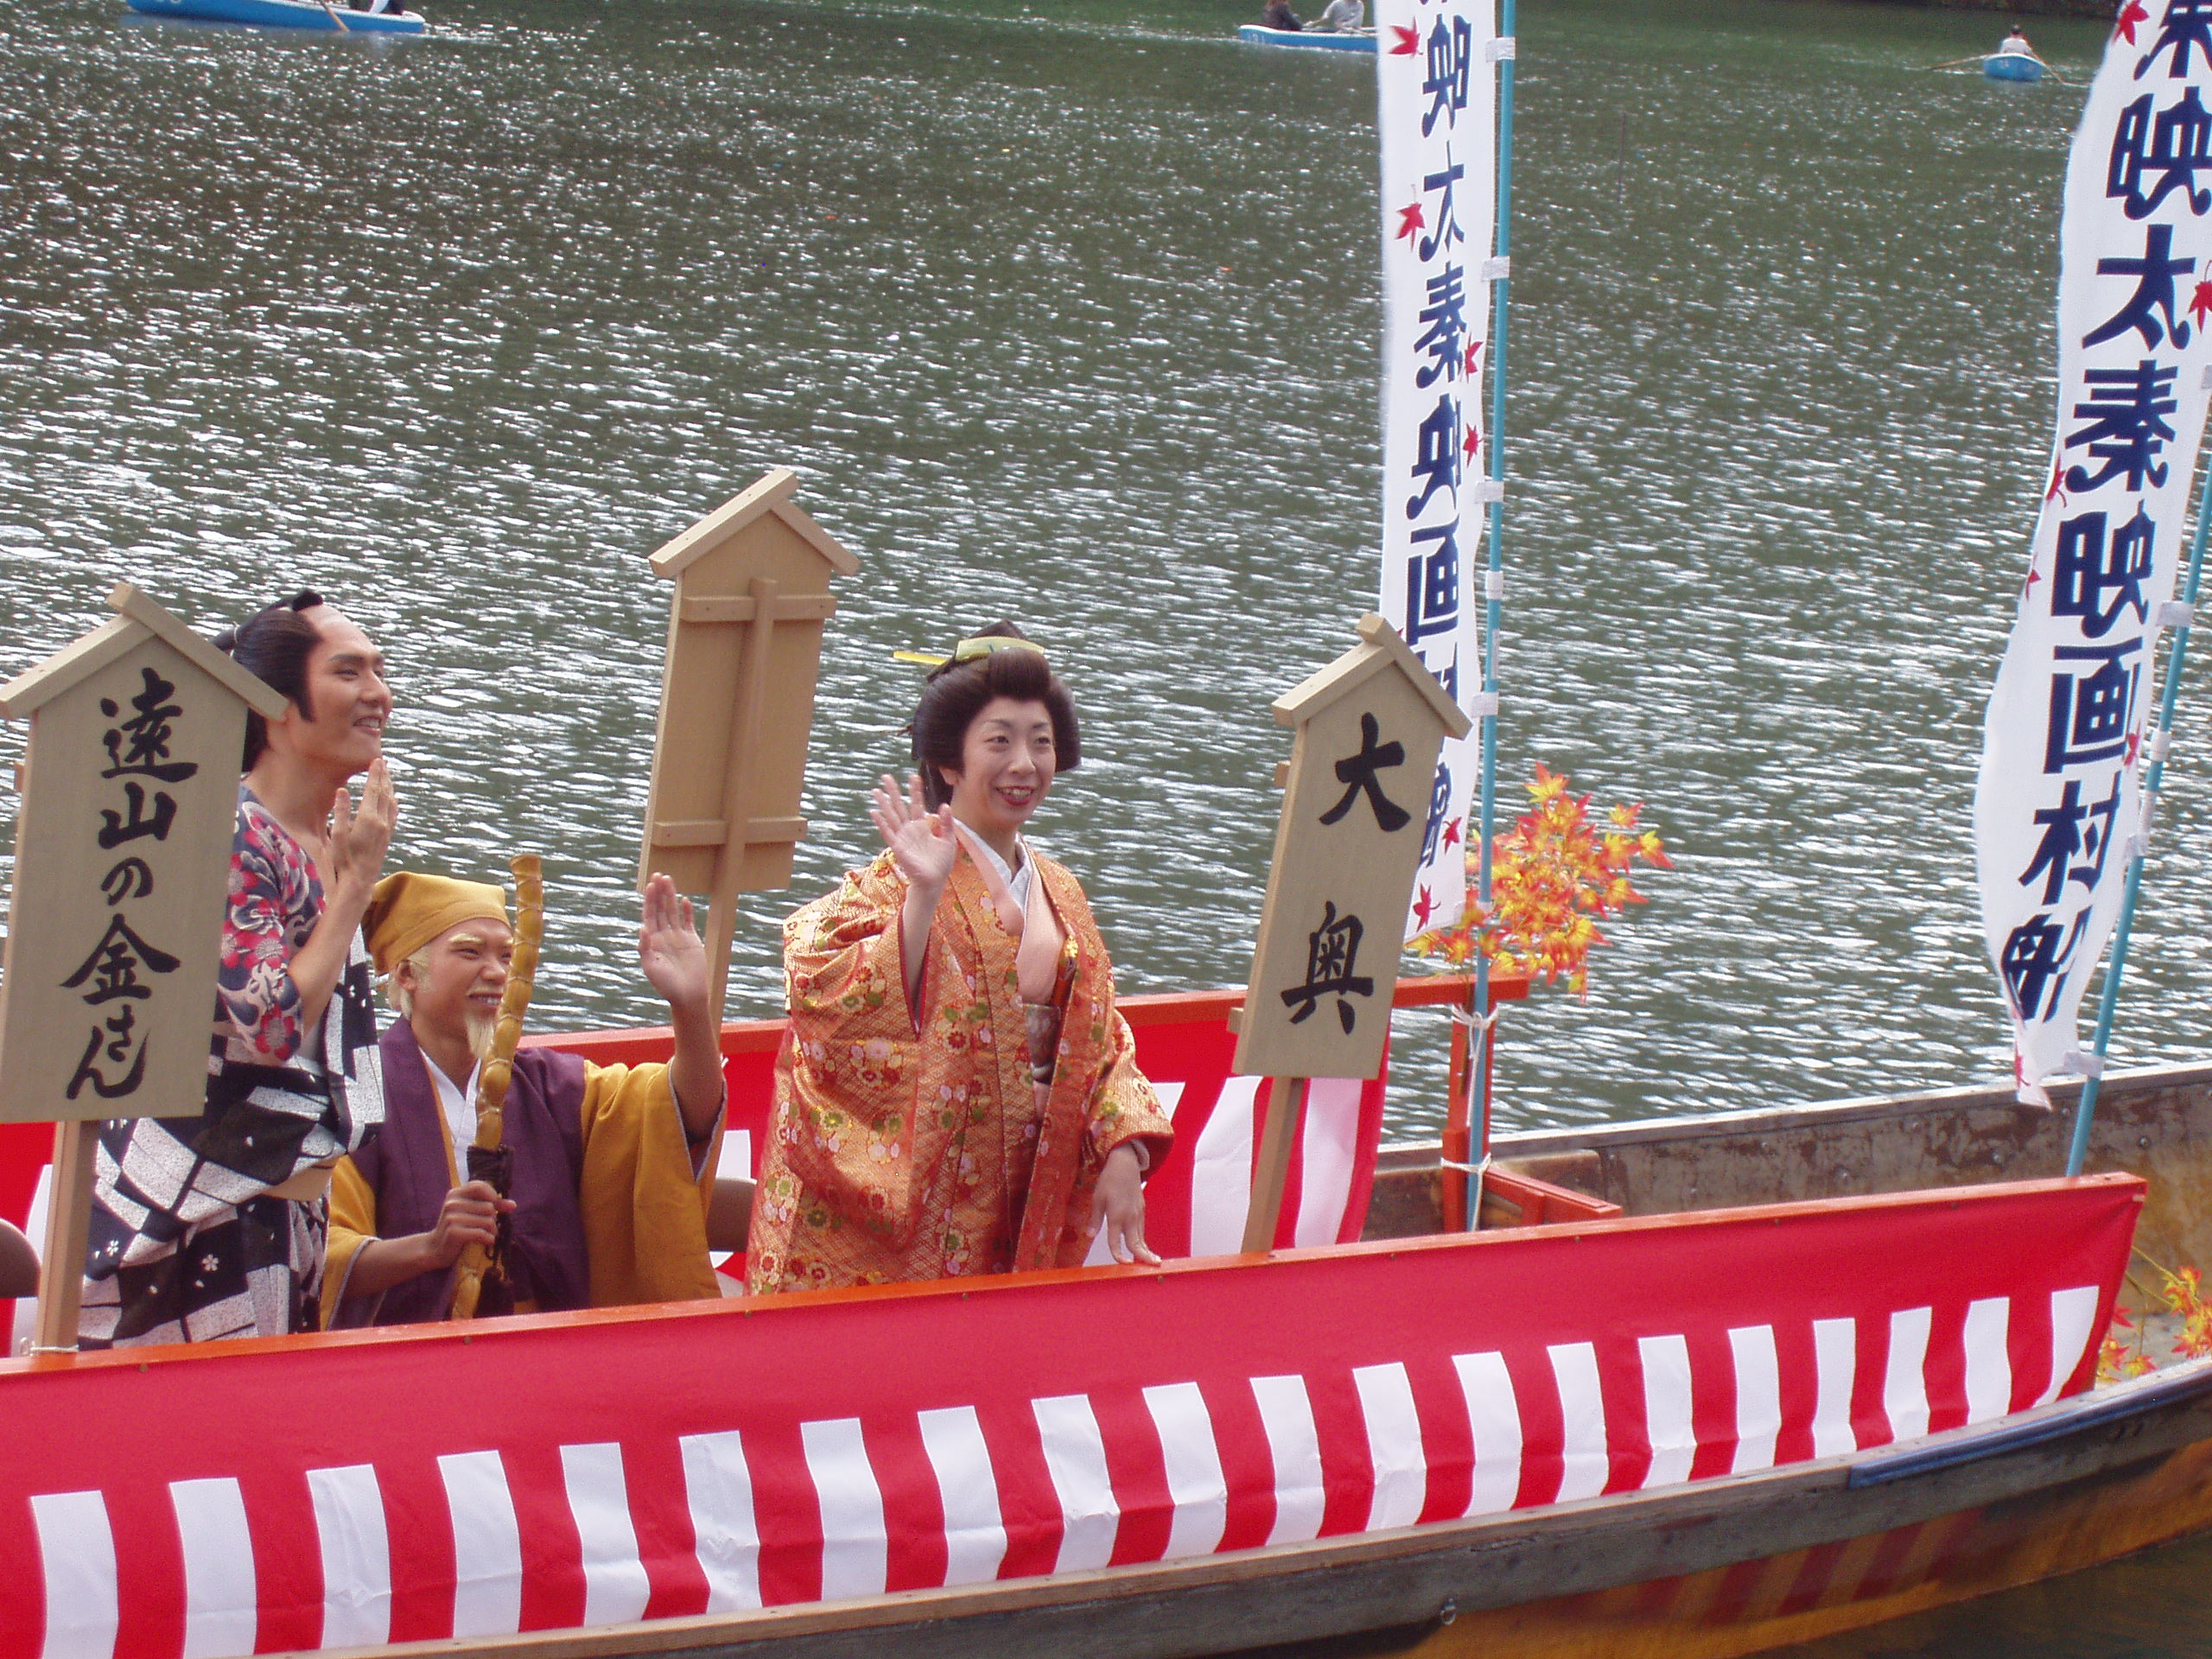 attending one of the traditional festivals near Kyoto